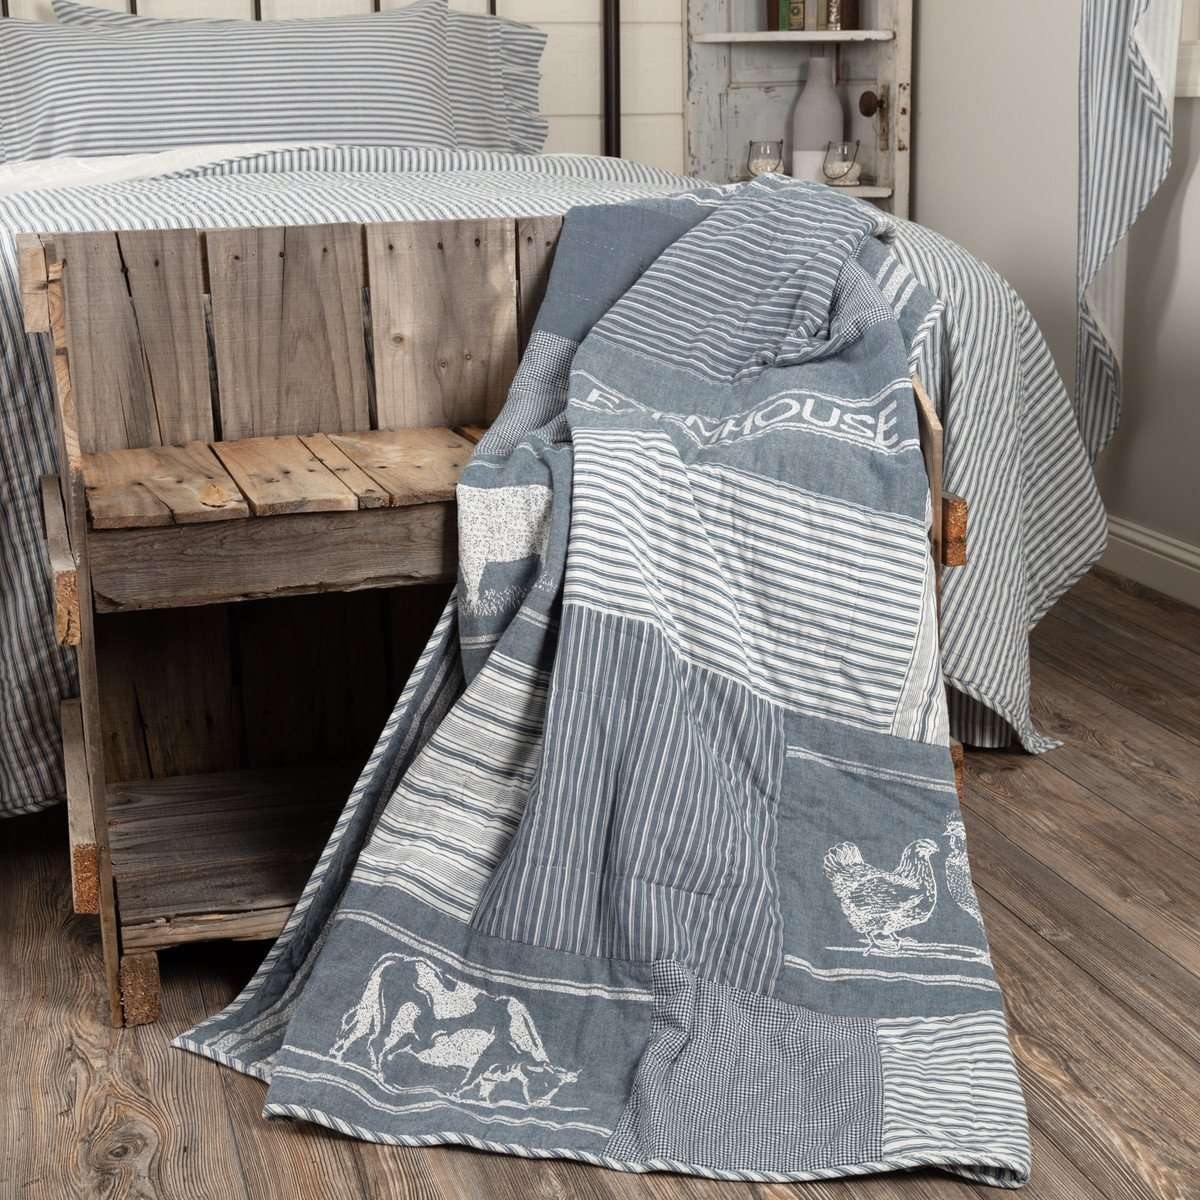 Sawyer Mill Blue Farm Animal Quilted Throw 60x50 VHC Brands